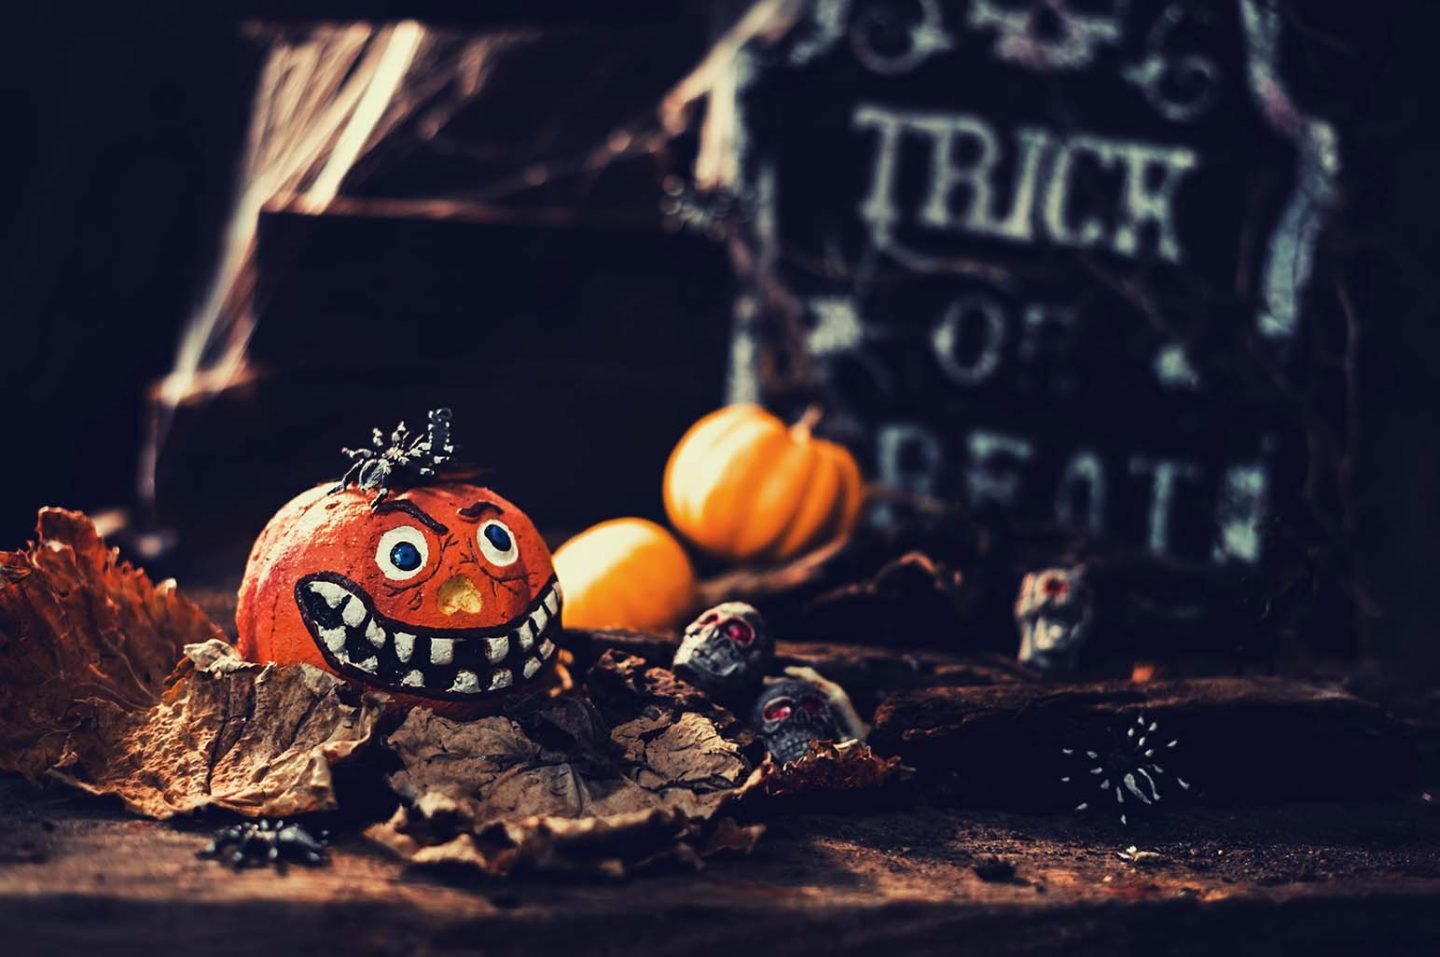 Tips for Trick-or-Treating in an Apartment Building